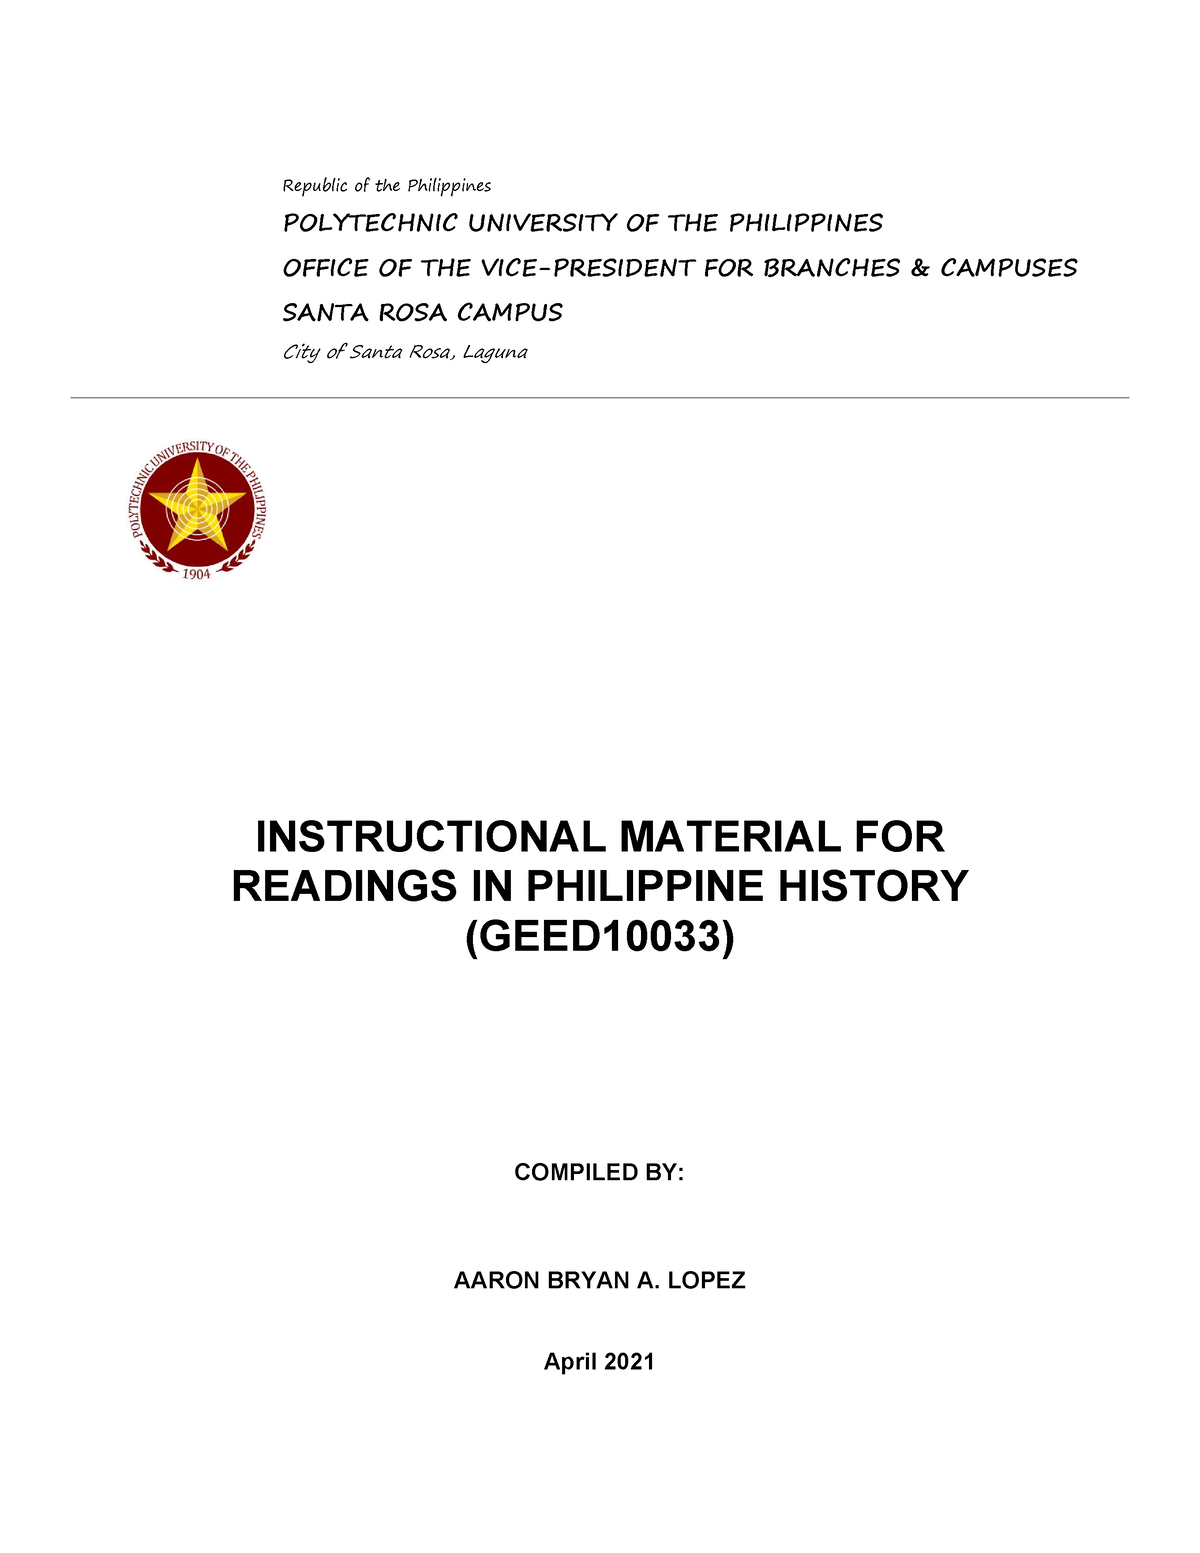 Geed 10033 Readings In Philippine History Republic Of The Philippines Polytechnic University 4529